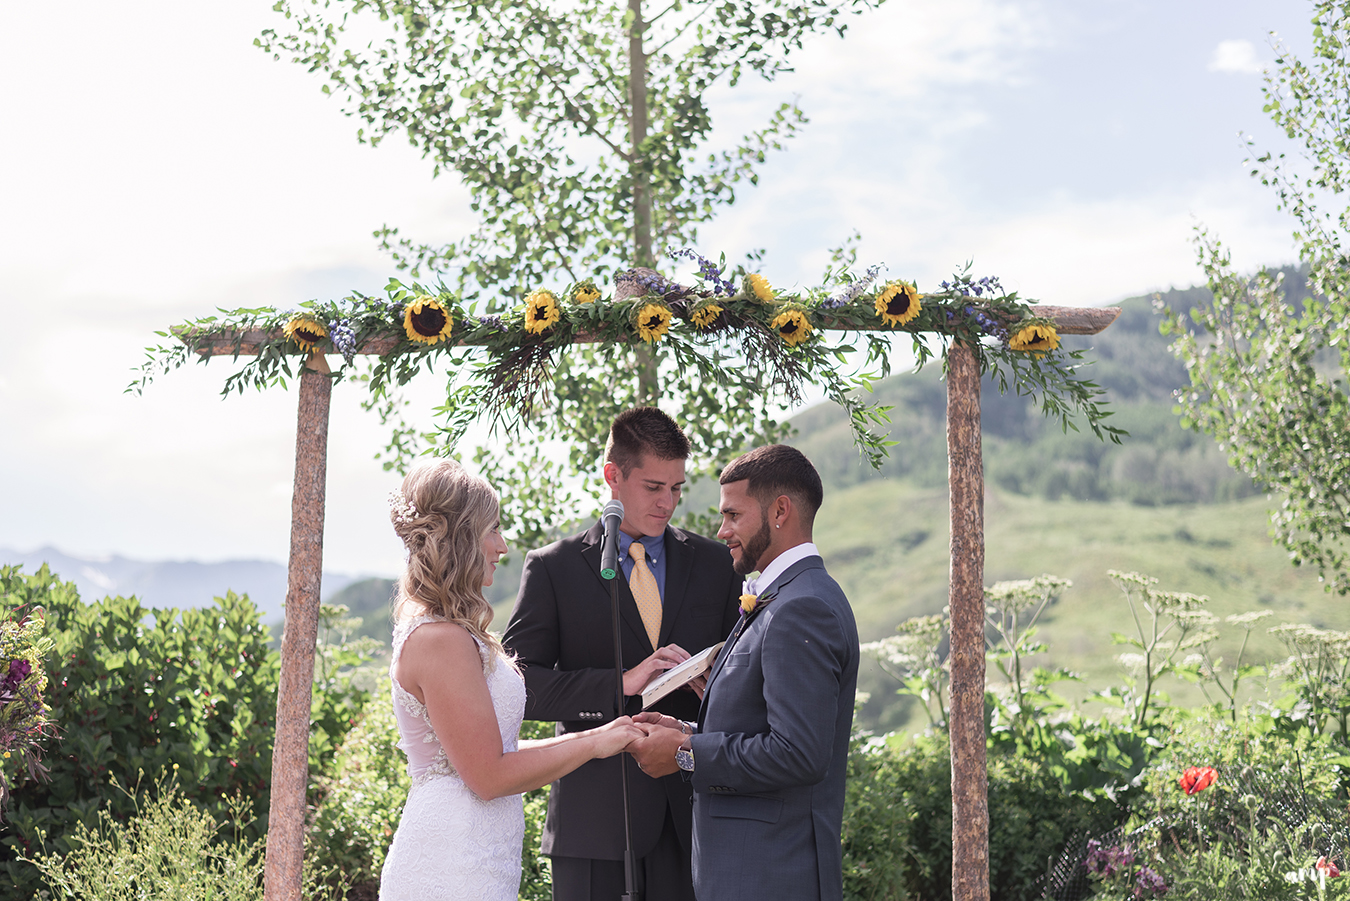 Bride and groom at the wooden arch altar of the Crested Butte Mountain Wedding Garden